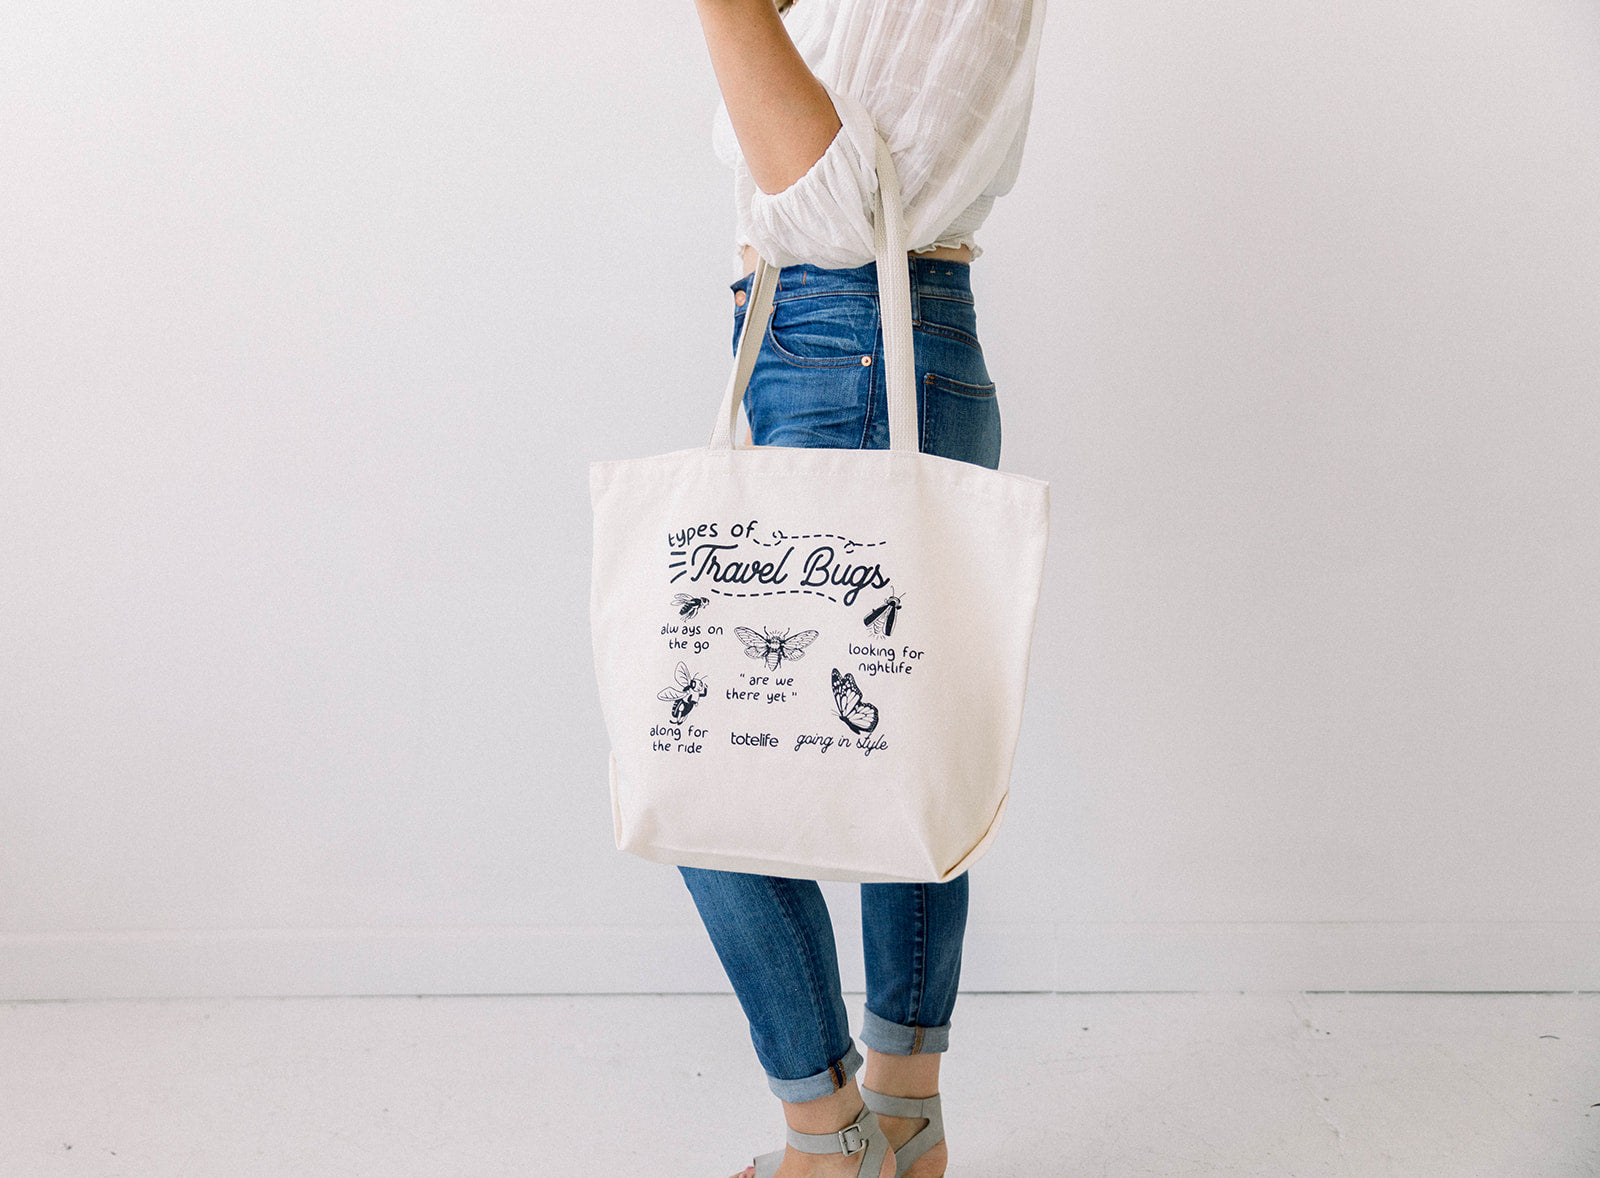 Travel Bugs Tote